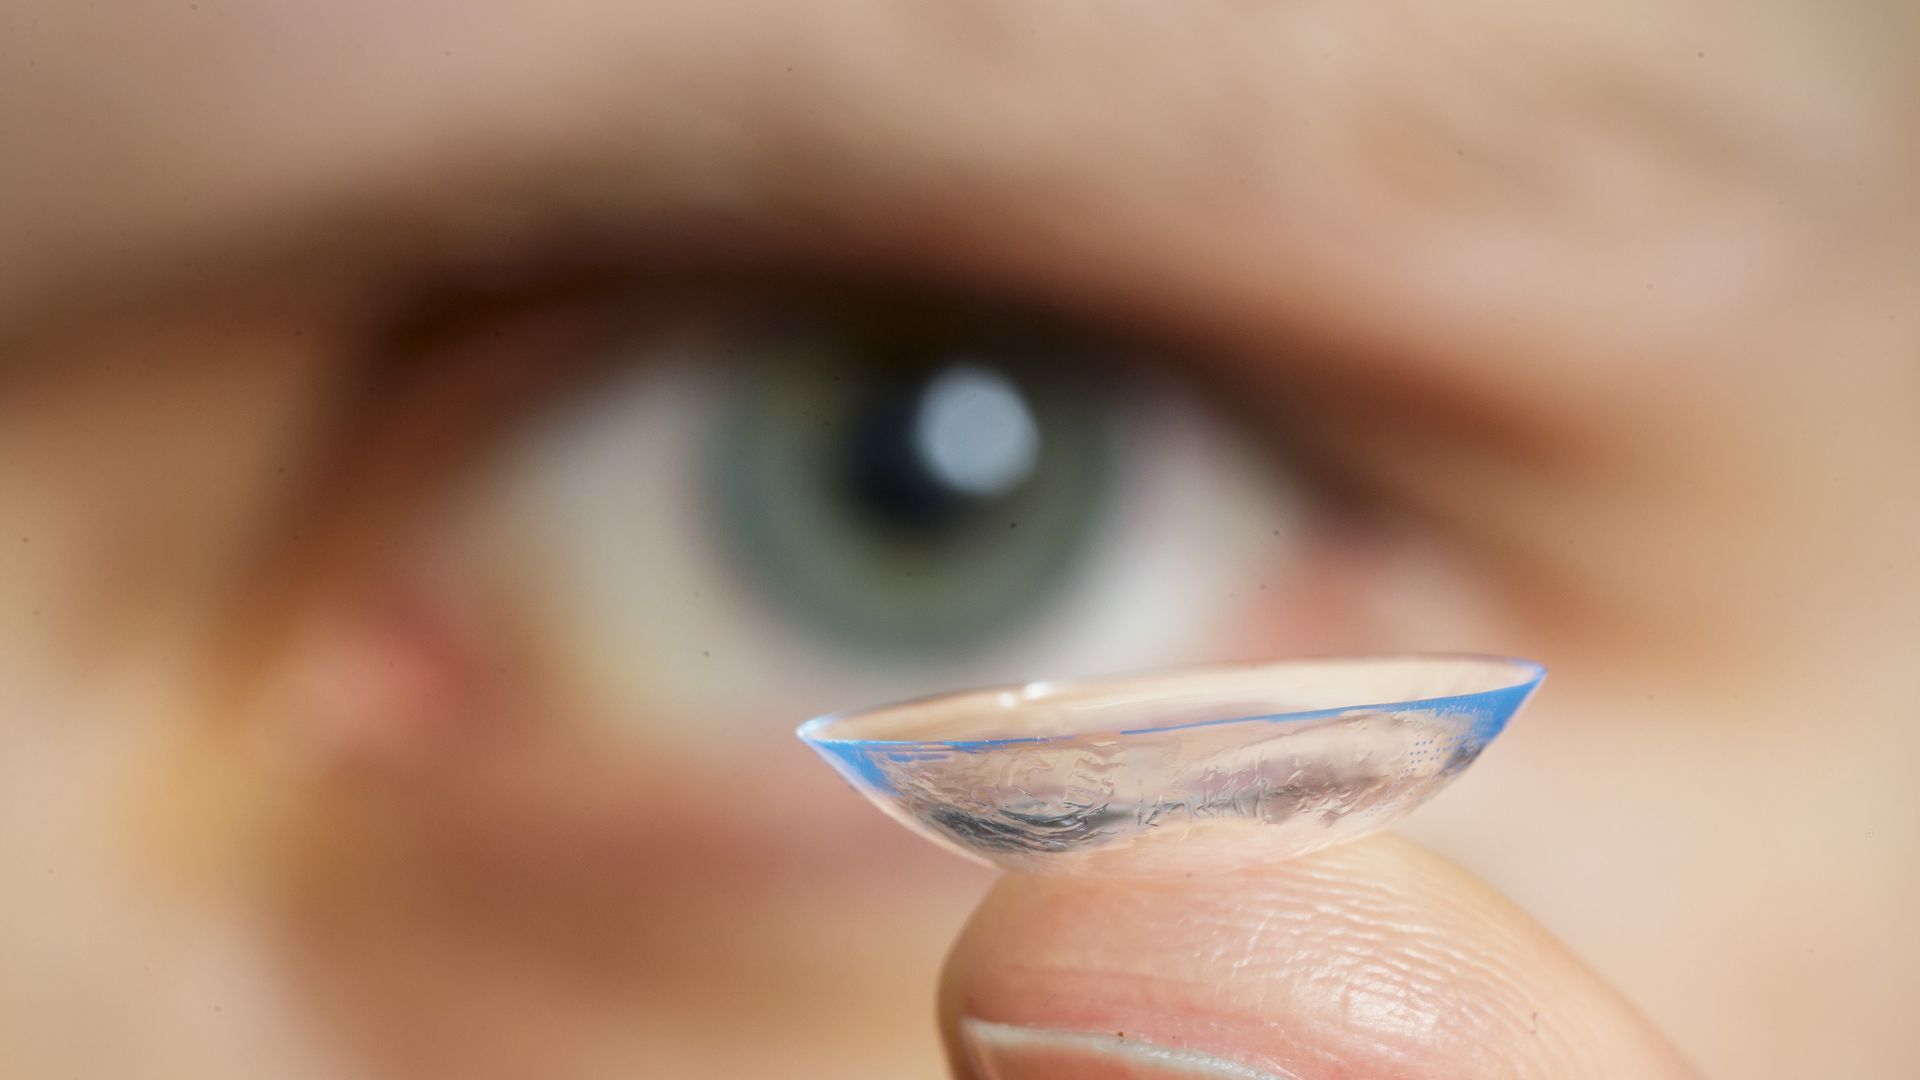 Someone holding up a contact lens on their finger with a blurred blue eye in the background